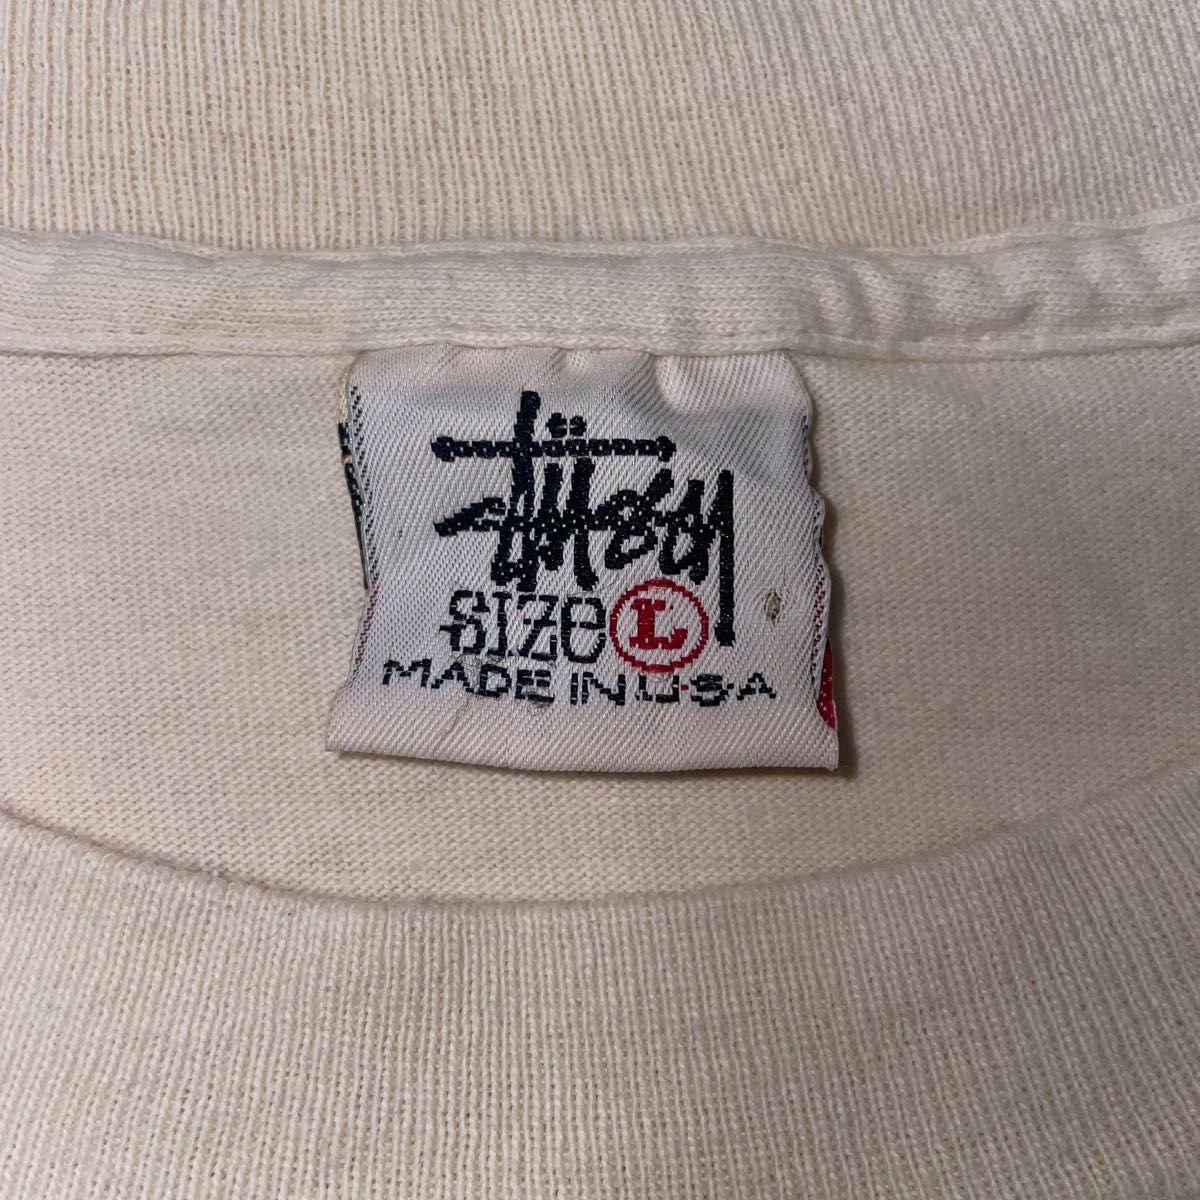 STUSSY OLD 90's ヴィンテージ TEE 白タグ USA製